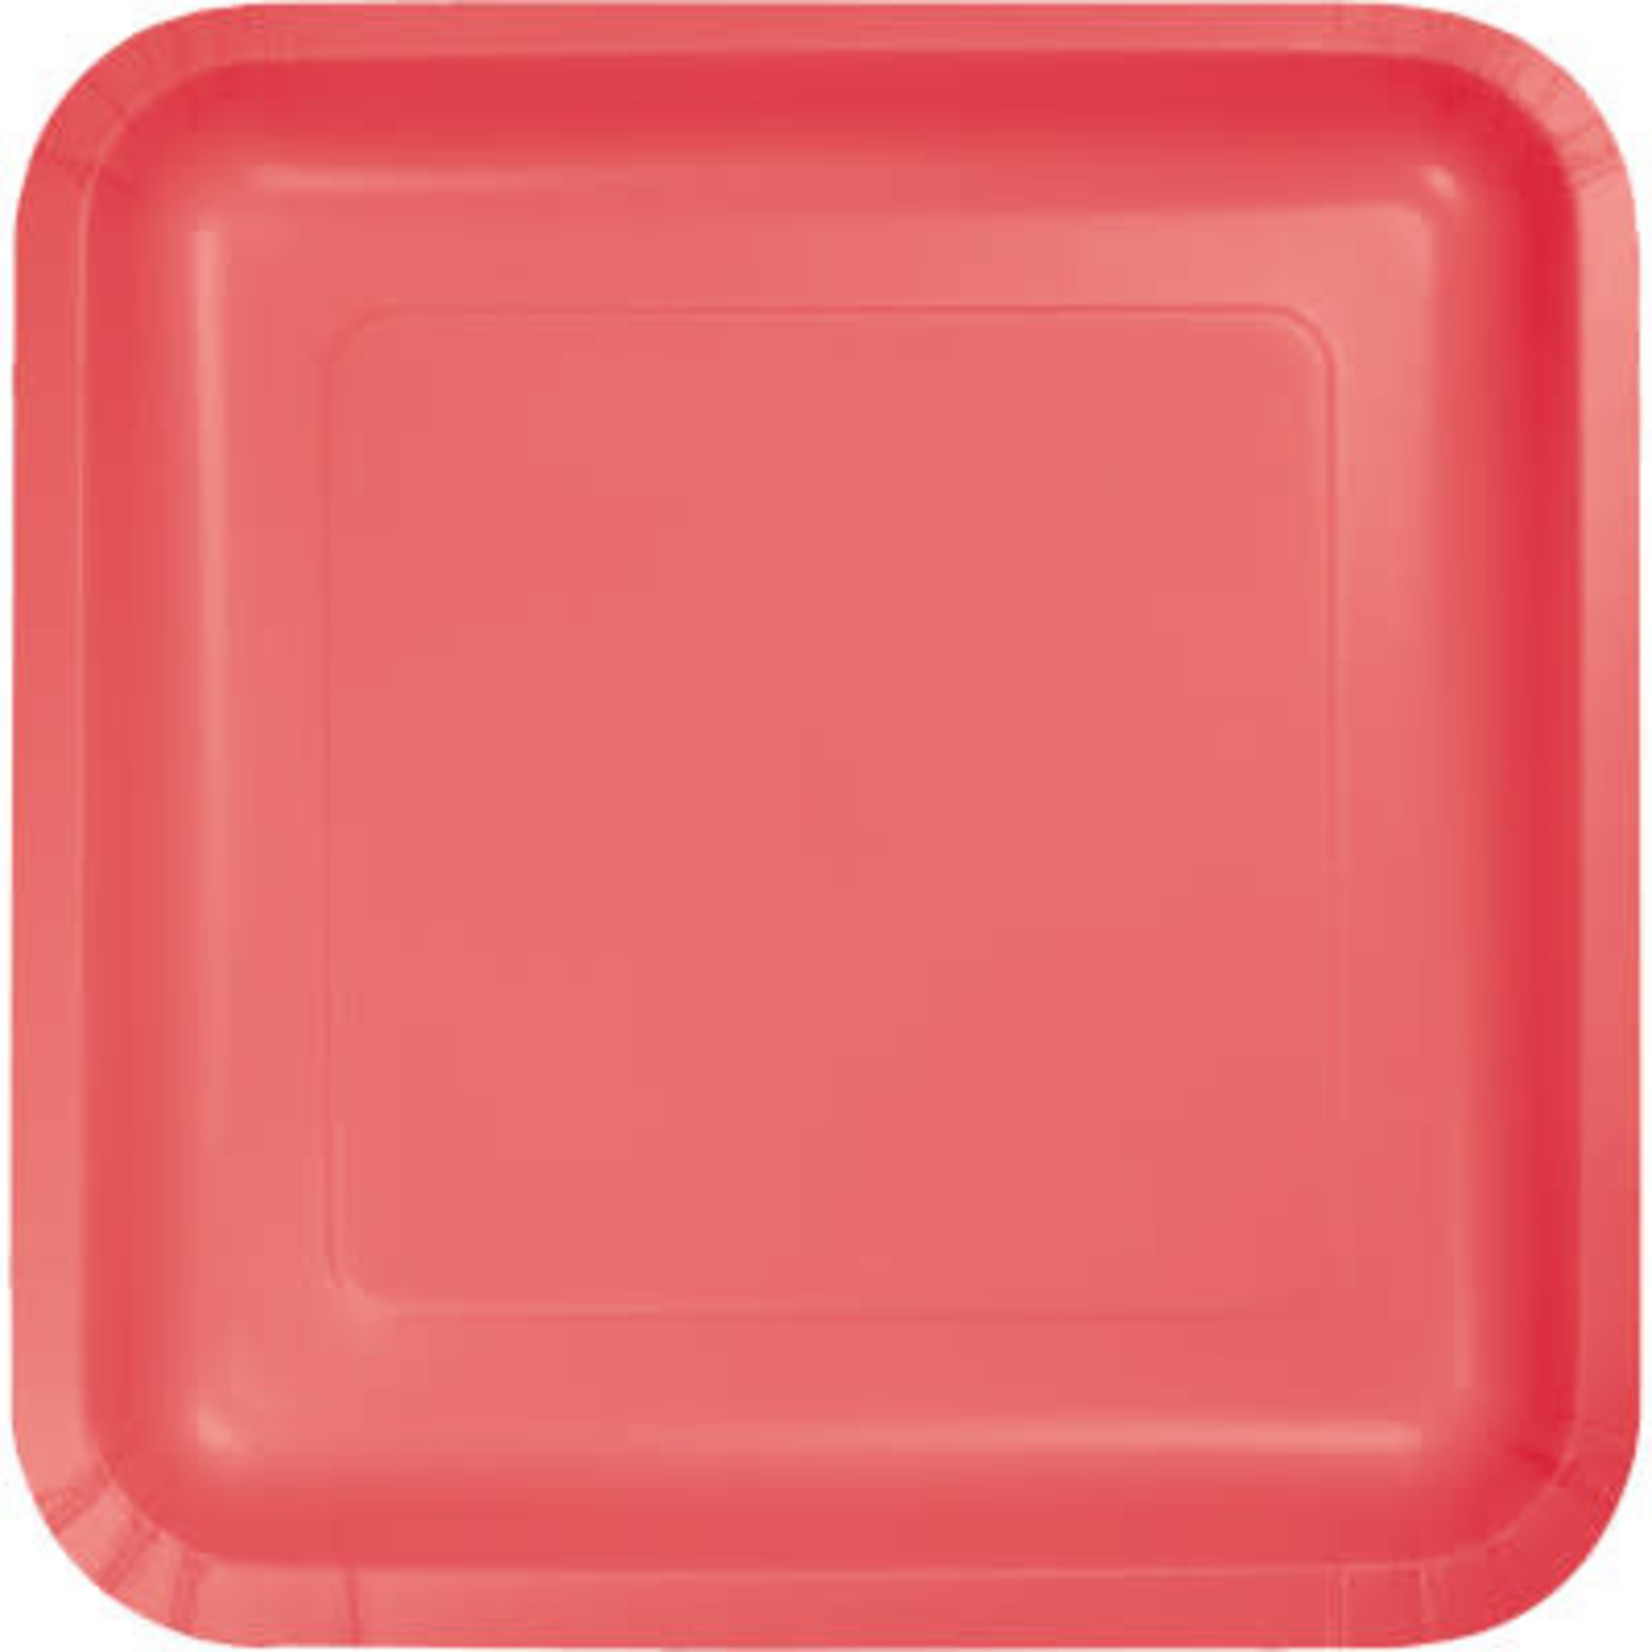 Touch of Color 7" Coral Square Paper Plates - 18ct.